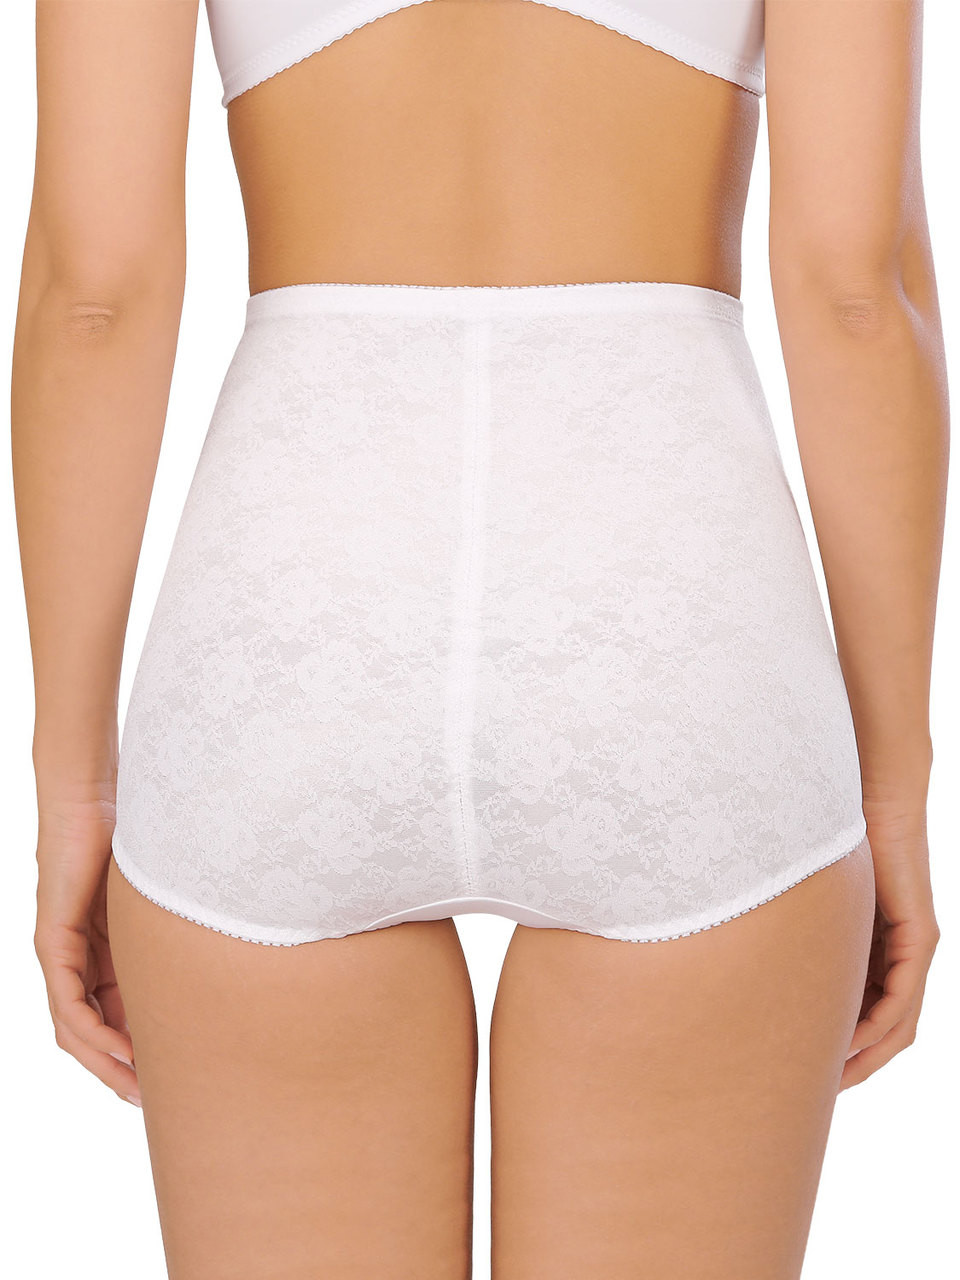 Panty Girdle With Reinforced Front Panel High Rise Firm Control (L-5XL) by  Naturana 0184